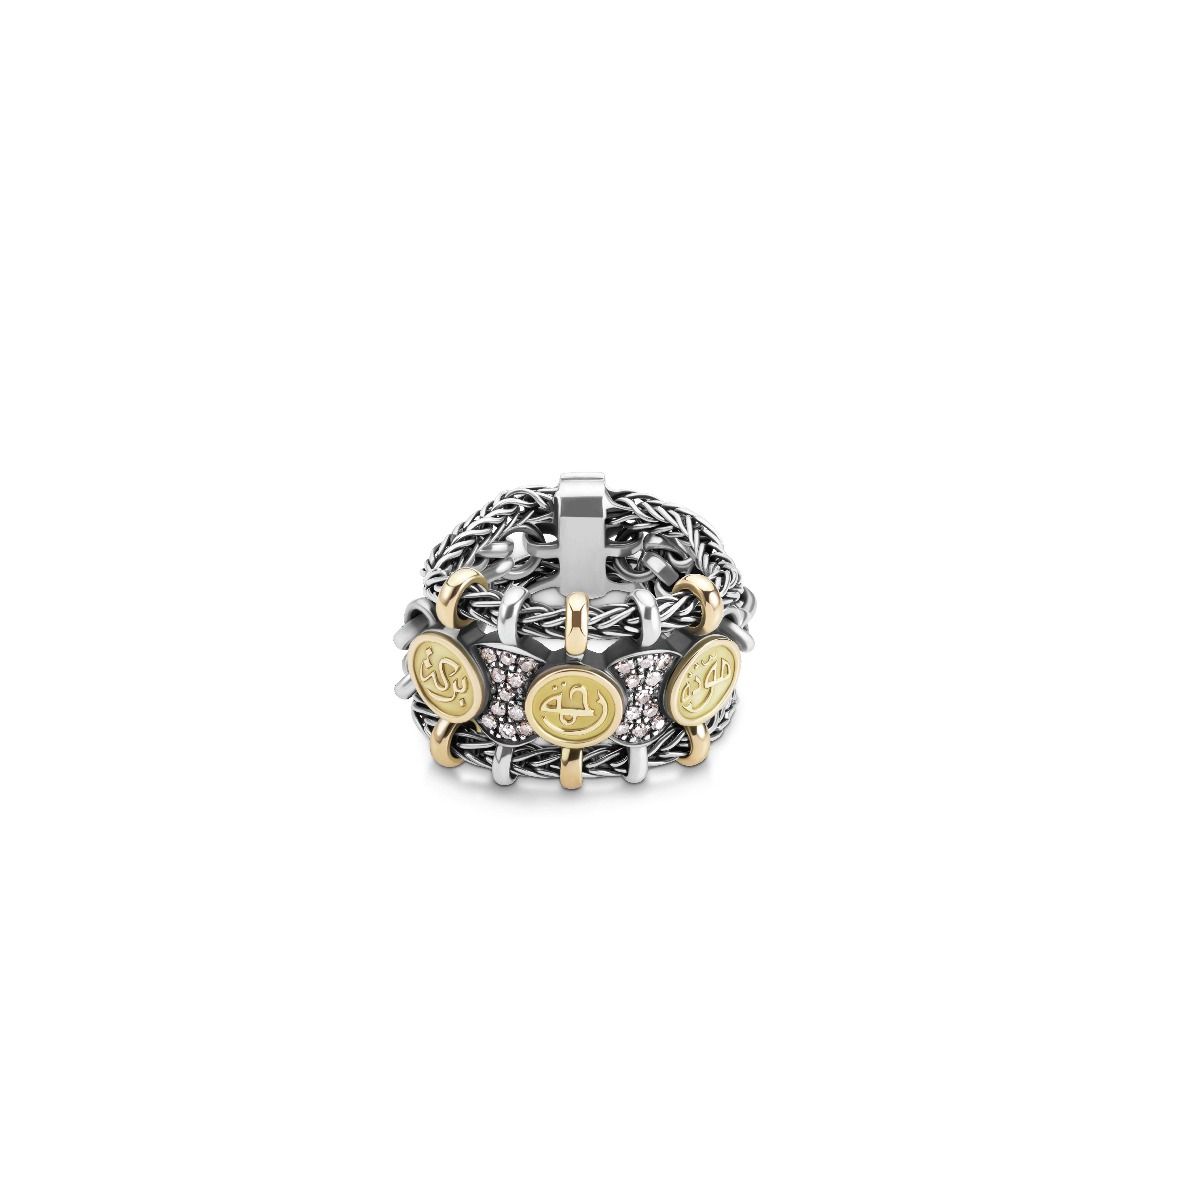 Blessings Chain Ring by Azza Fahmy - Designer Rings